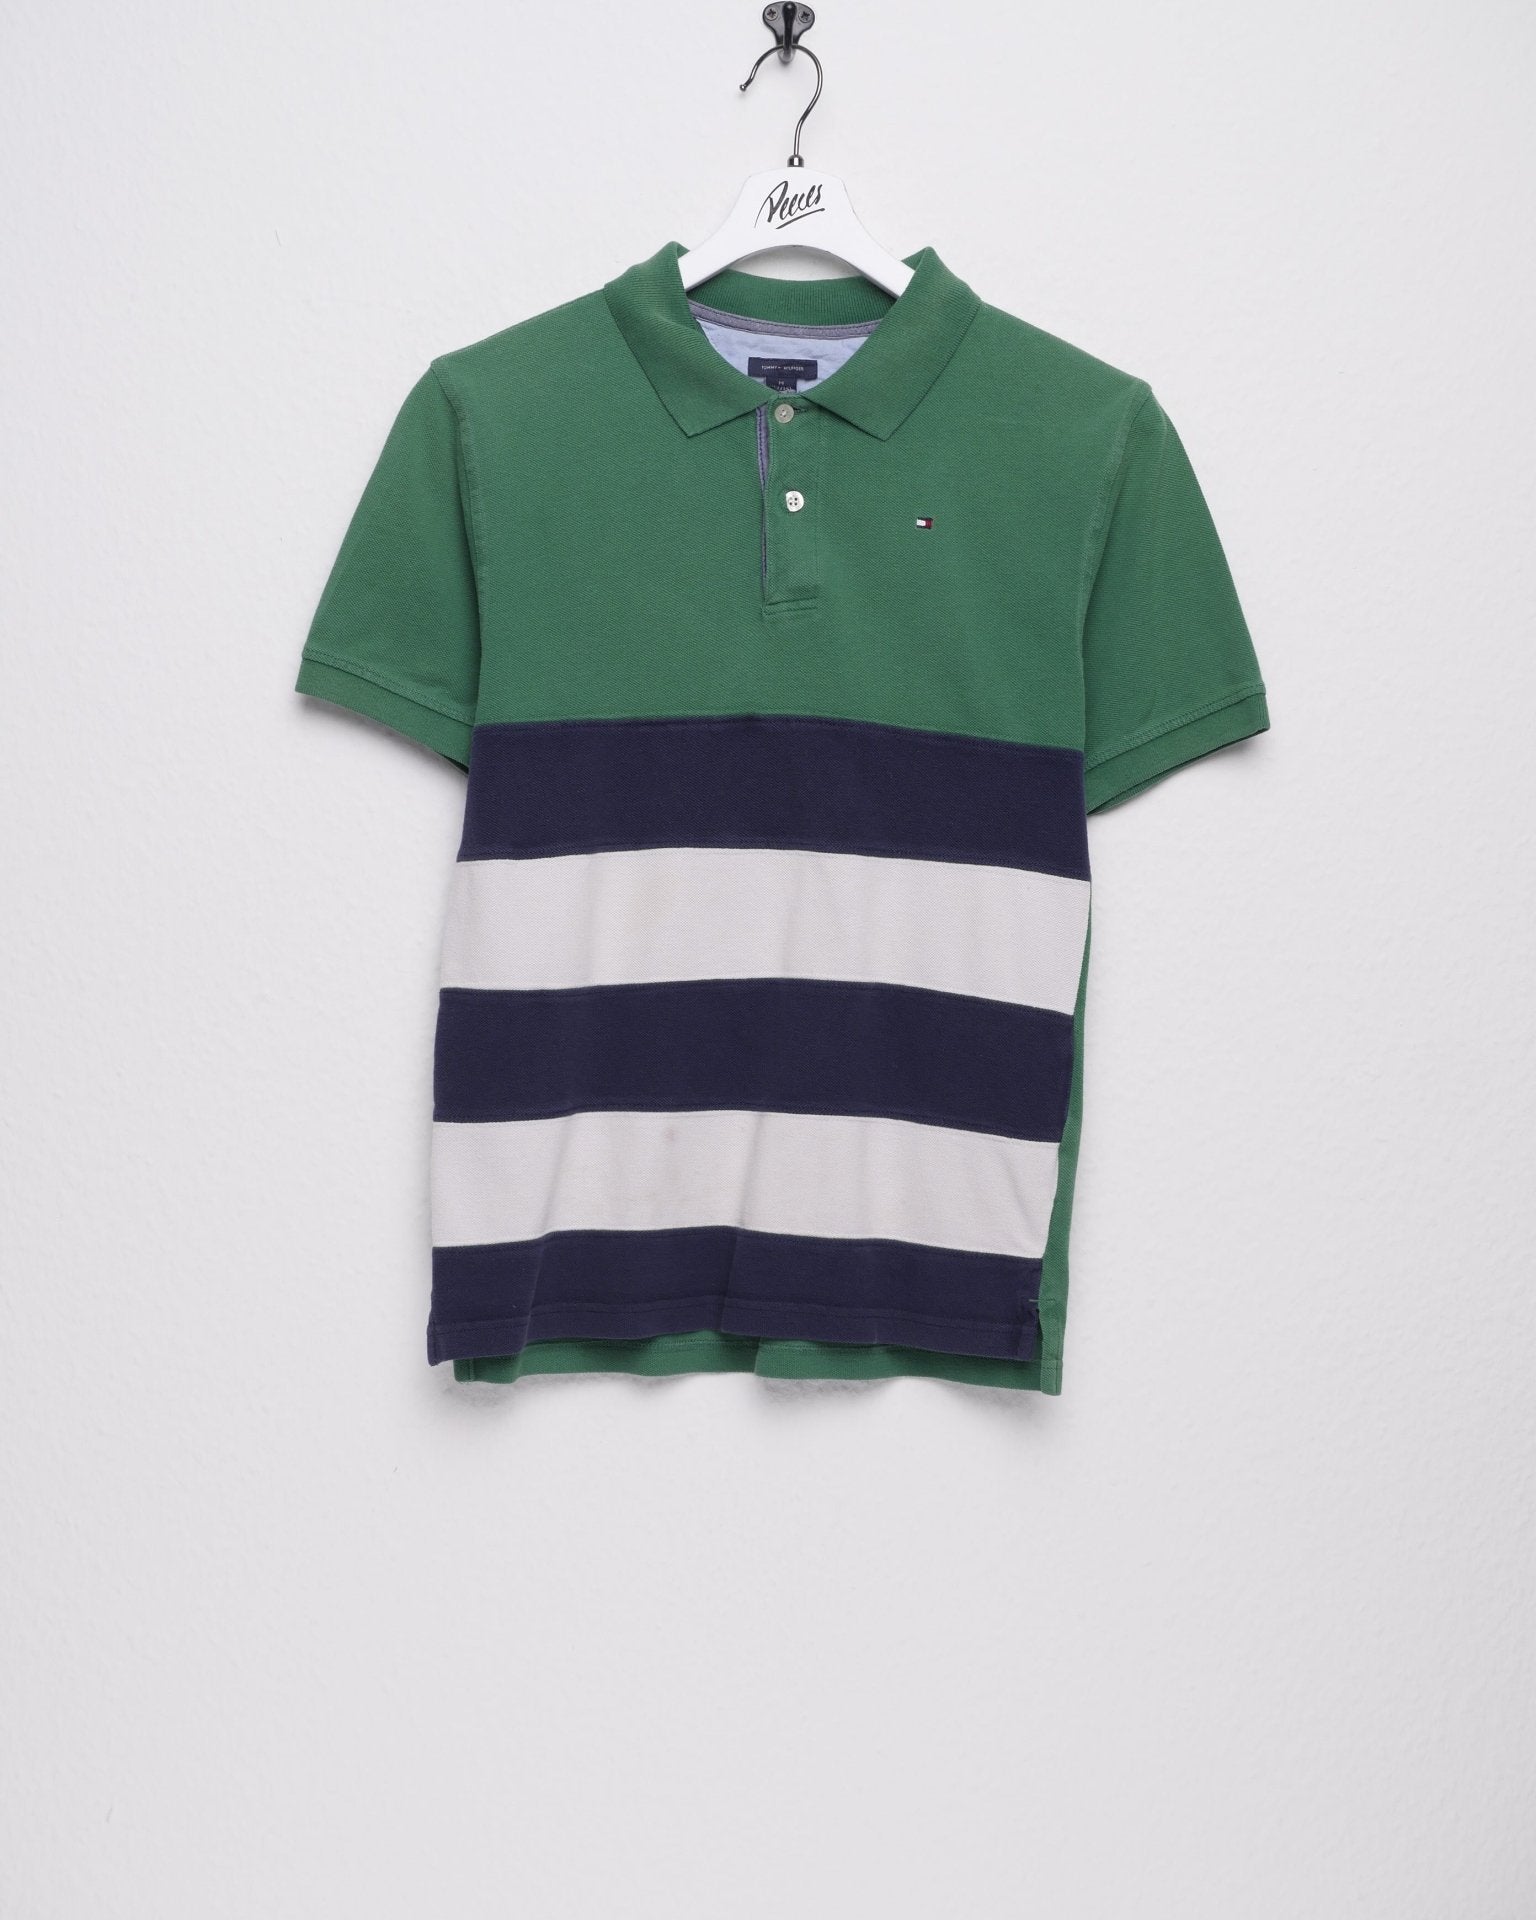 Tommy embroidered Logo three toned Polo Shirt - Peeces